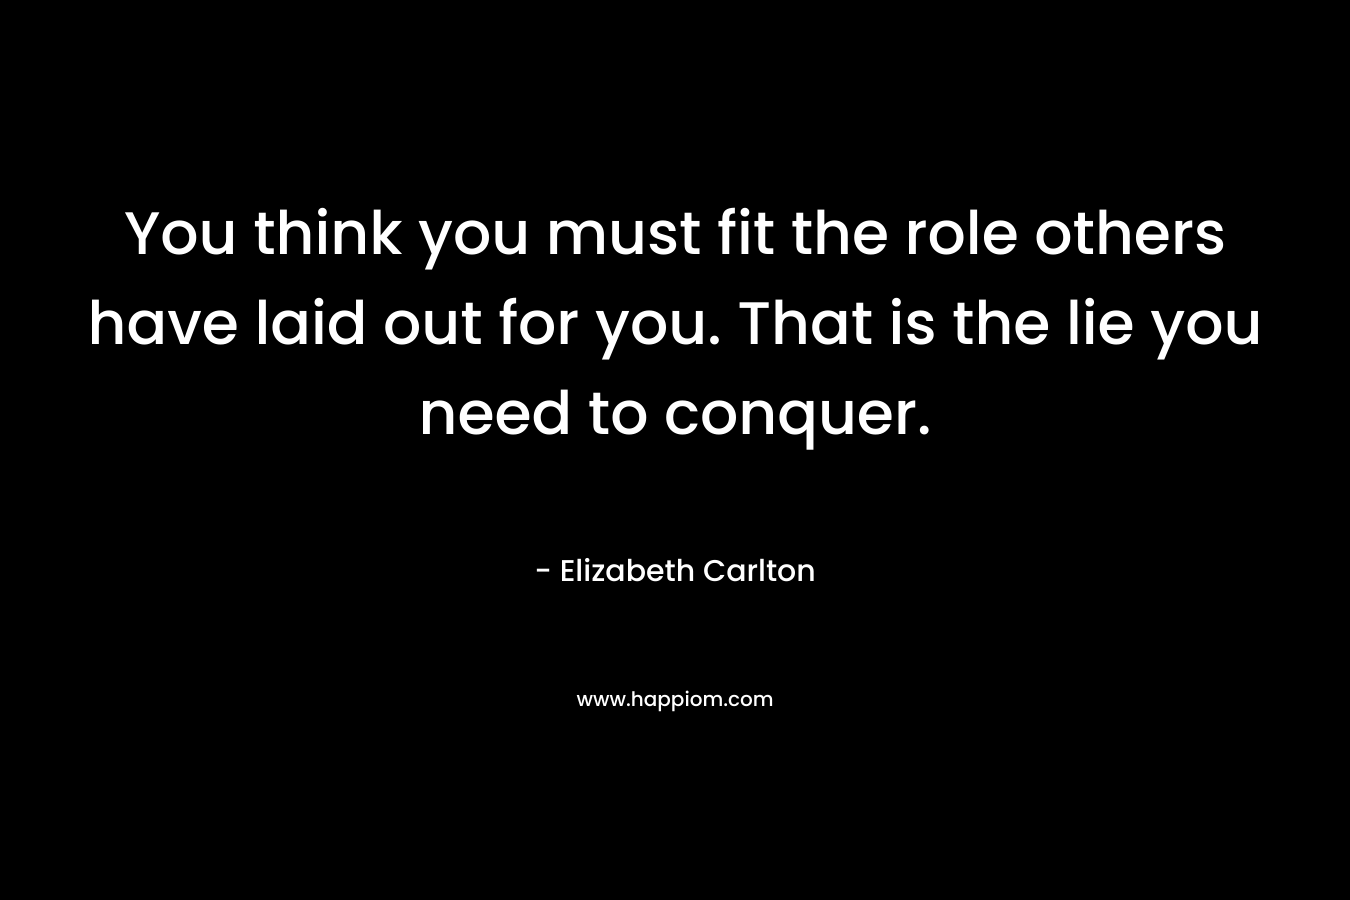 You think you must fit the role others have laid out for you. That is the lie you need to conquer.